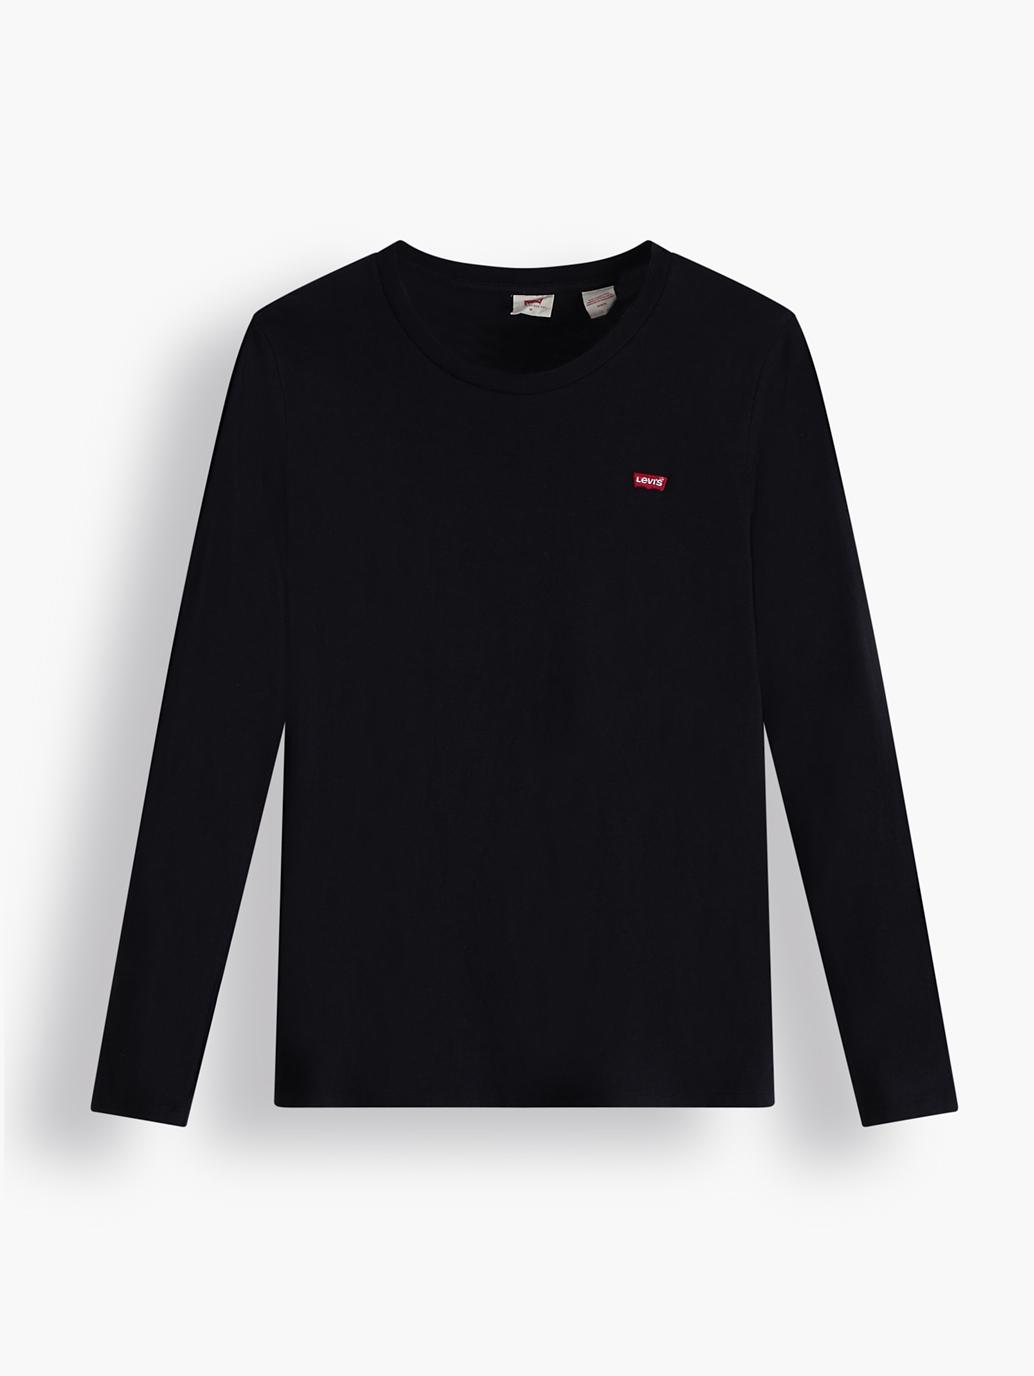 levis malaysia womens long sleeve perfect tee A15620001 19 Details